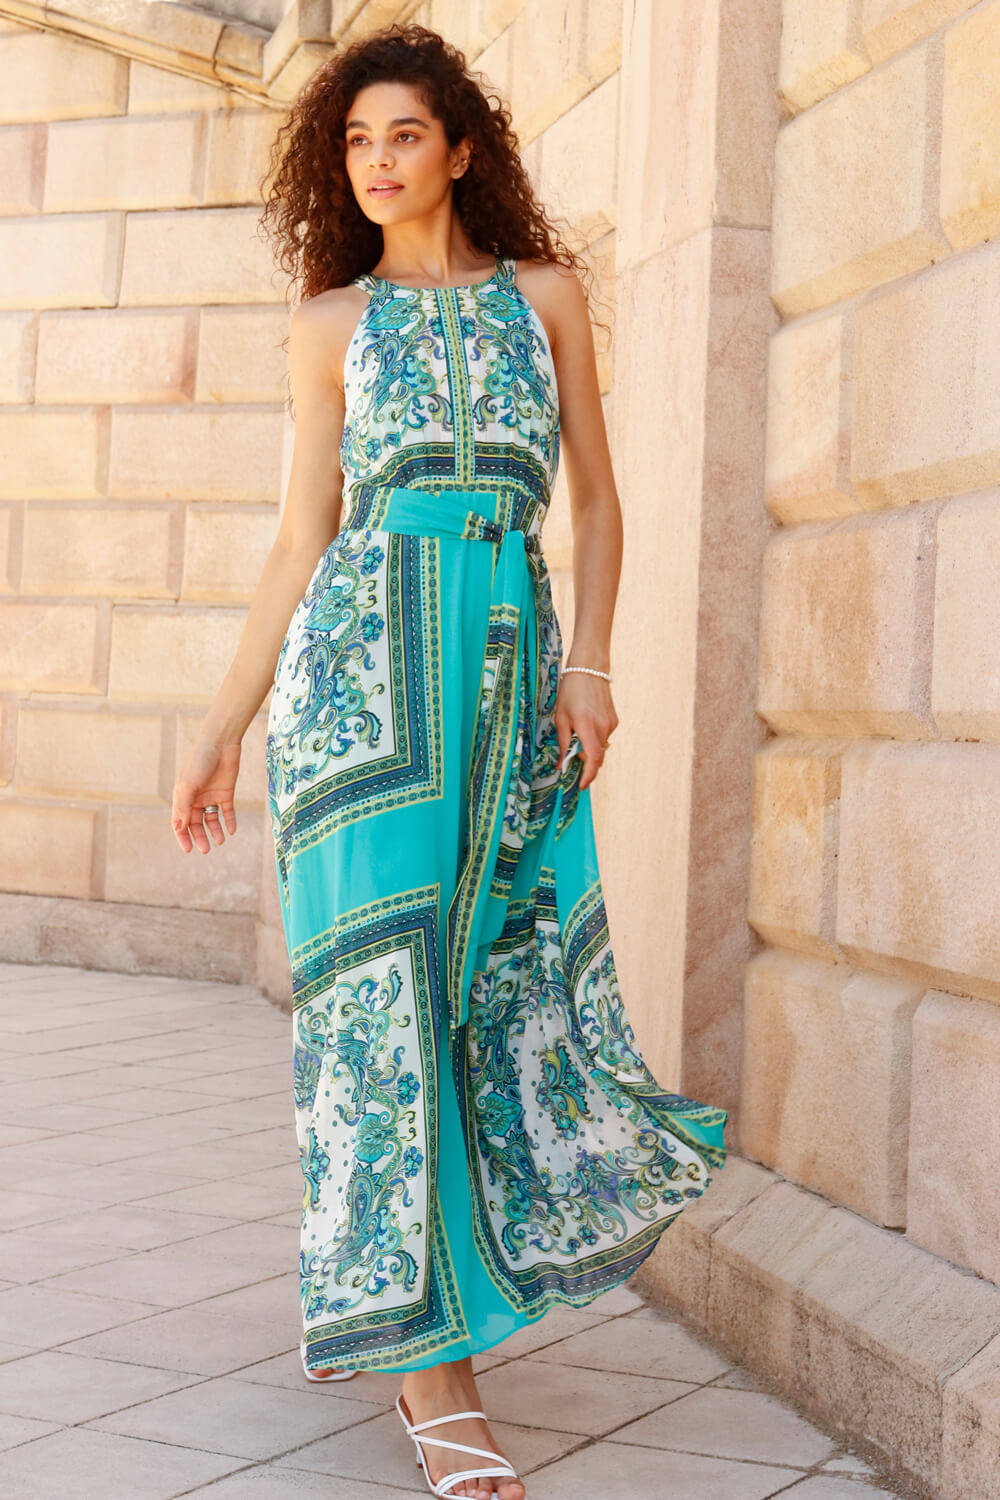 That perfect turquoise bohemian maxi dress for this Summer.